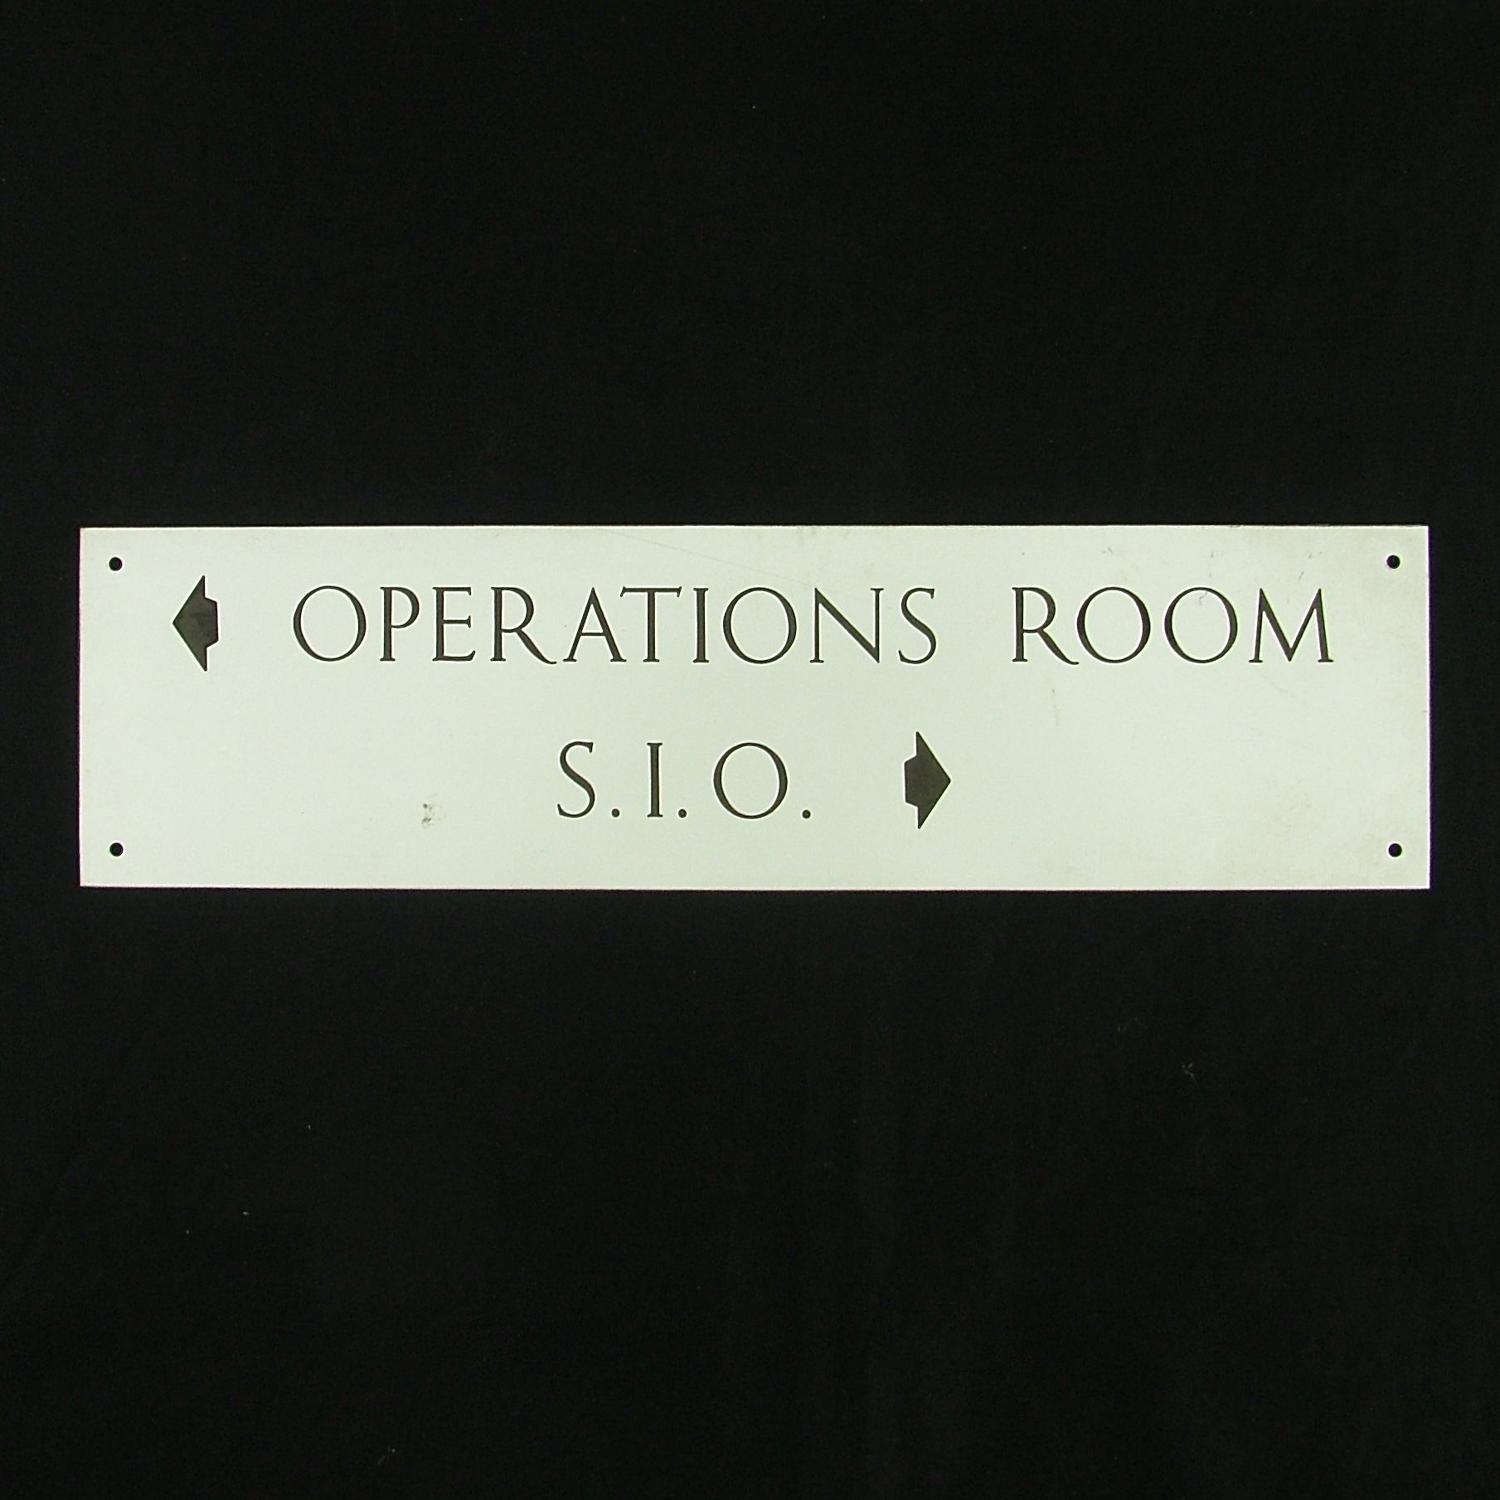 Royal Navy D-day HQ operations room sign